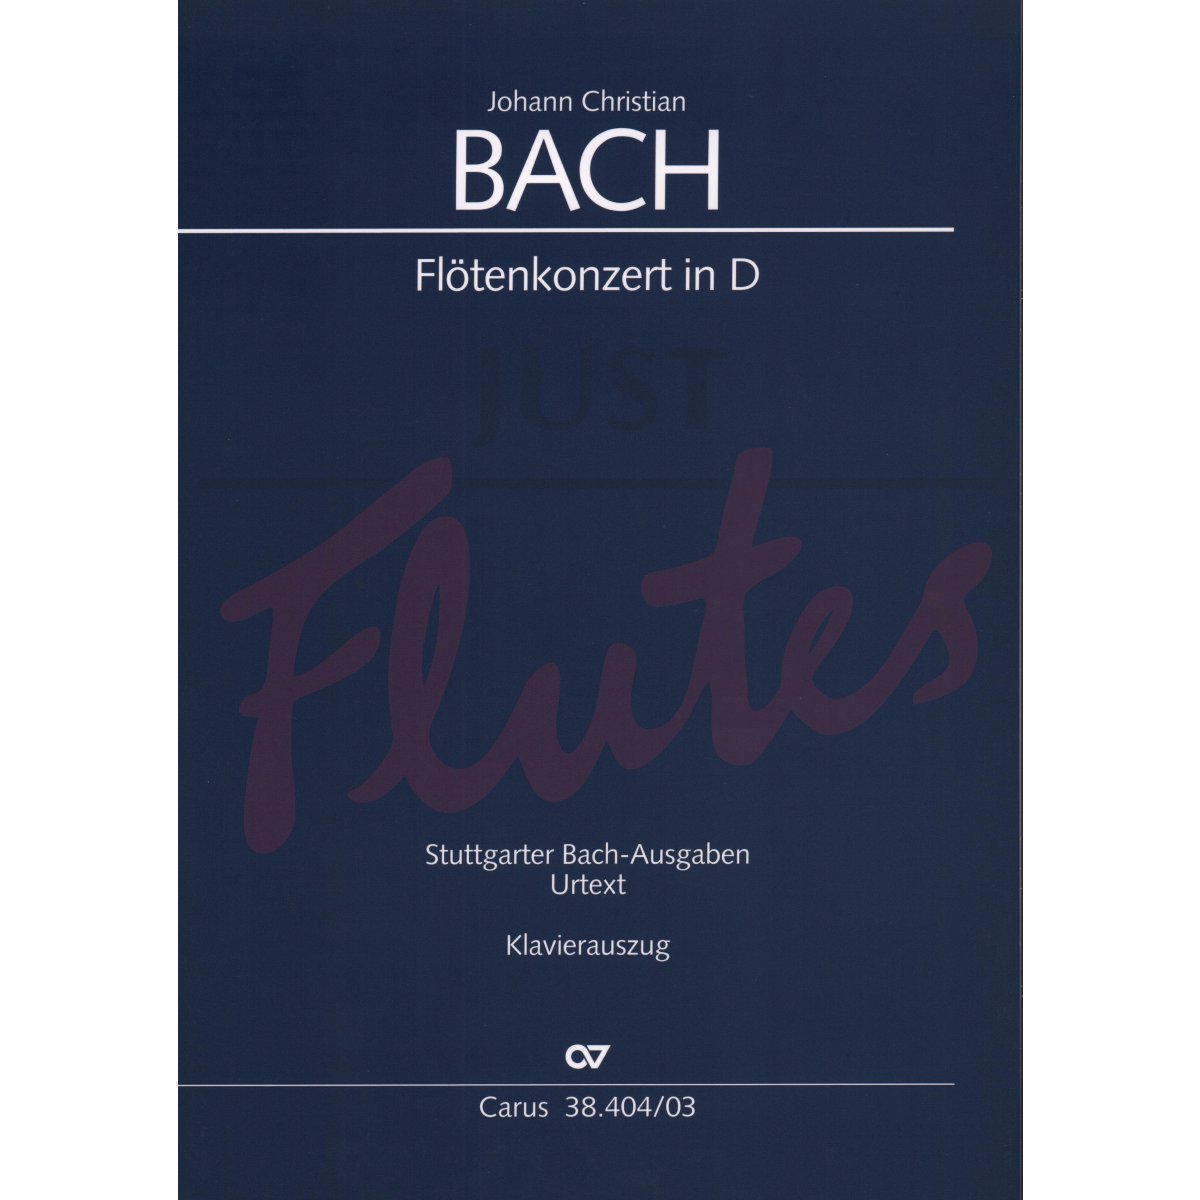 Flute Concerto in D major arranged for Flute and Piano